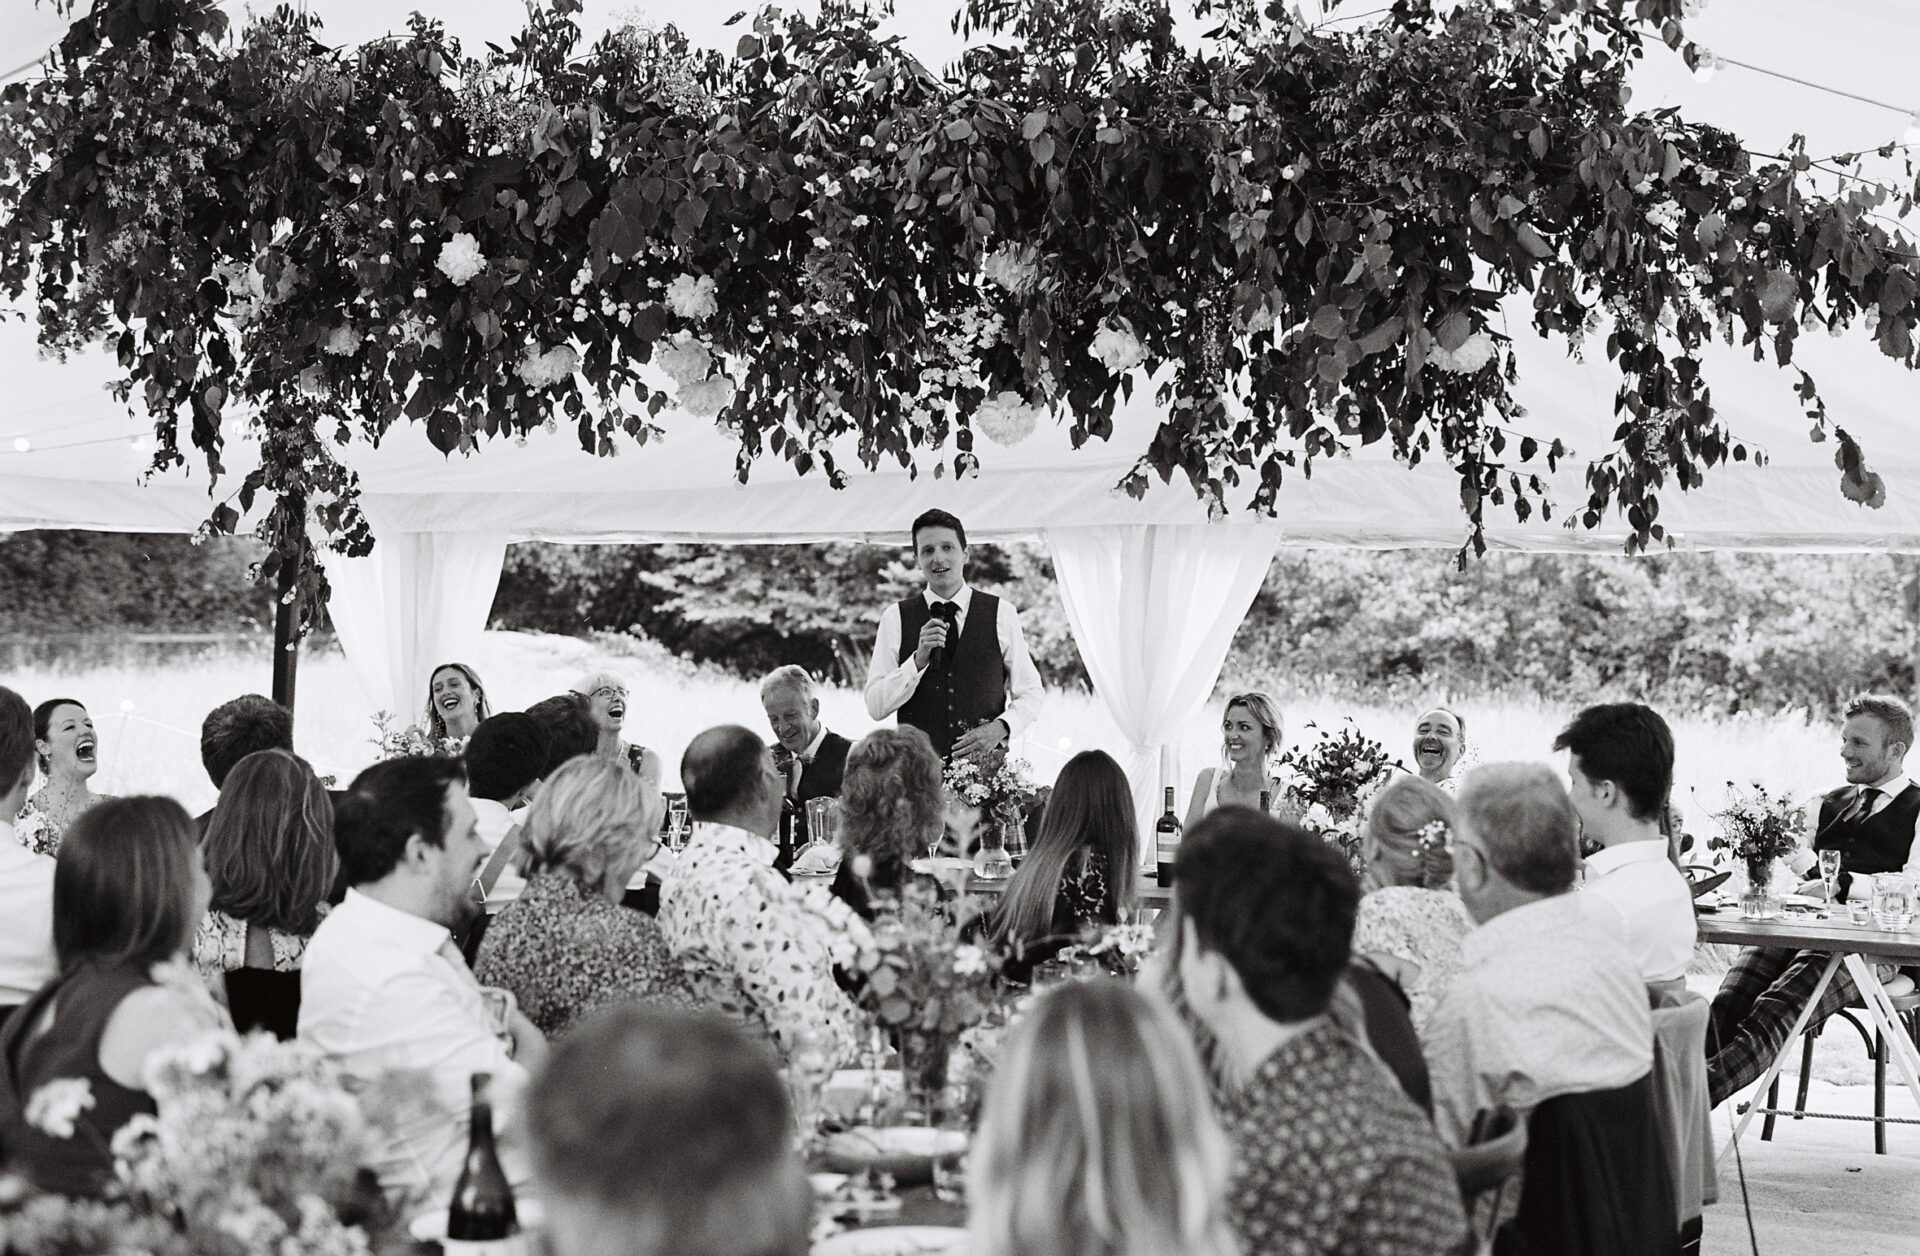 The groom gives a wedding speech, captured on 35mm film